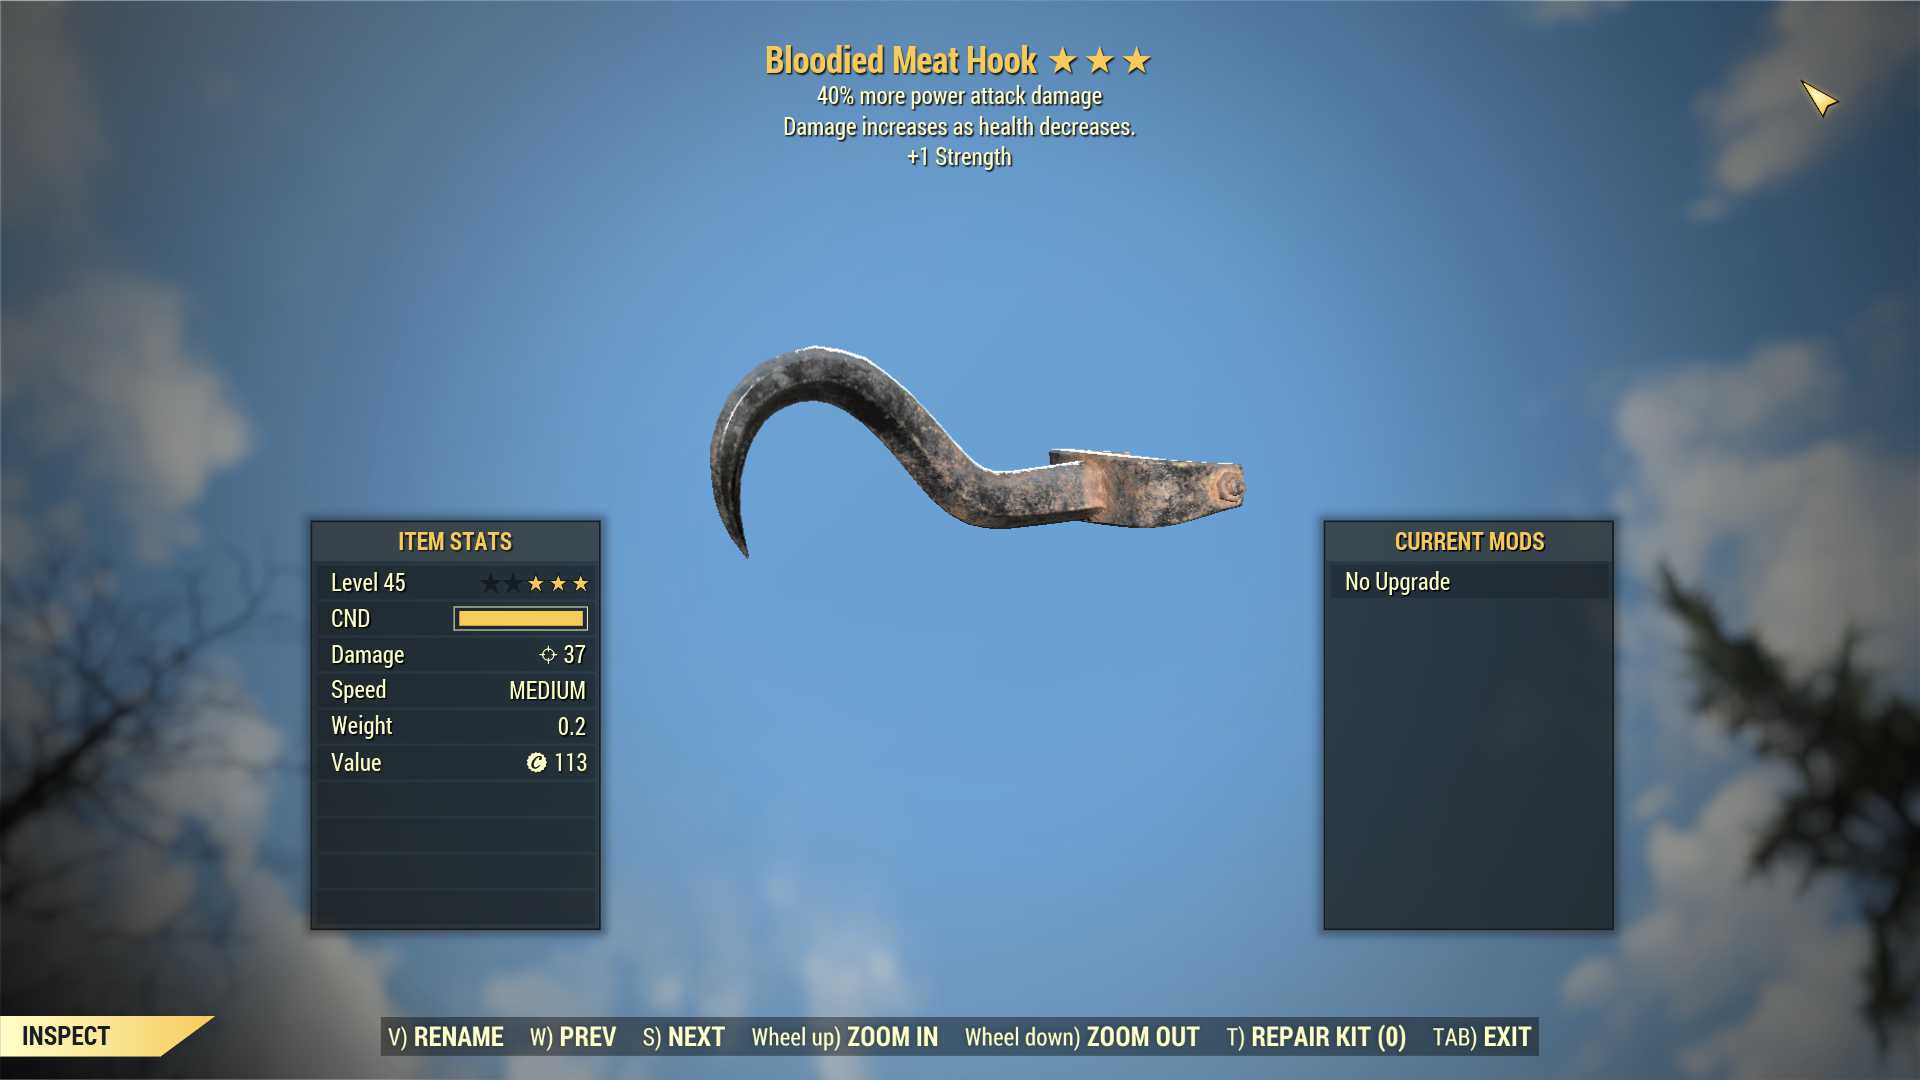 Bloodied Meat Hook (+40% damage PA, +1 Strength)